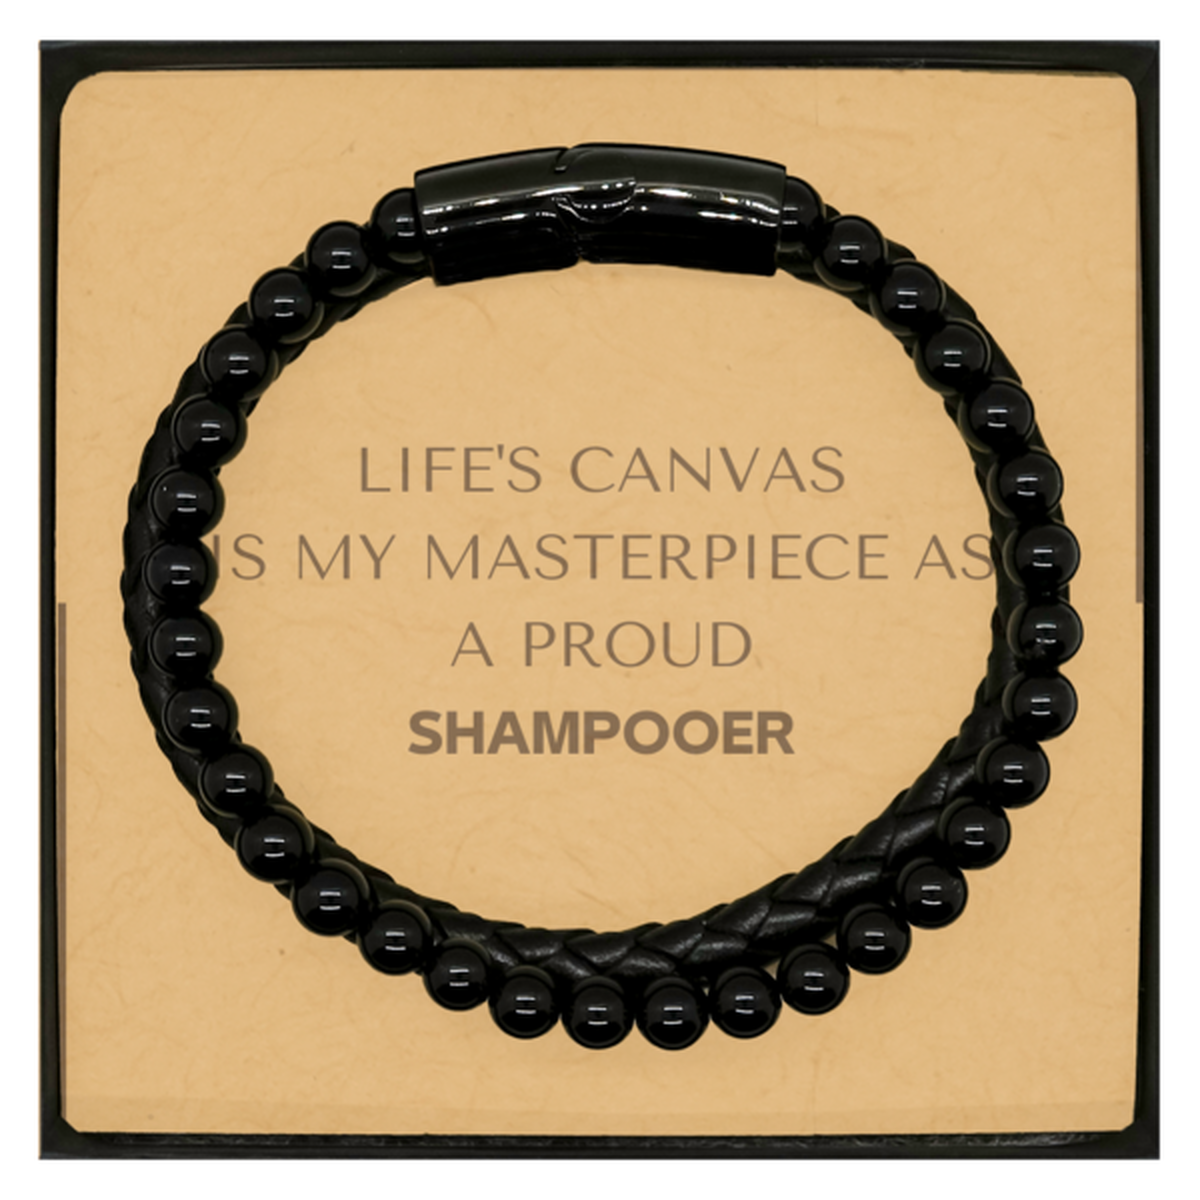 Proud Shampooer Gifts, Life's canvas is my masterpiece, Epic Birthday Christmas Unique Stone Leather Bracelets For Shampooer, Coworkers, Men, Women, Friends